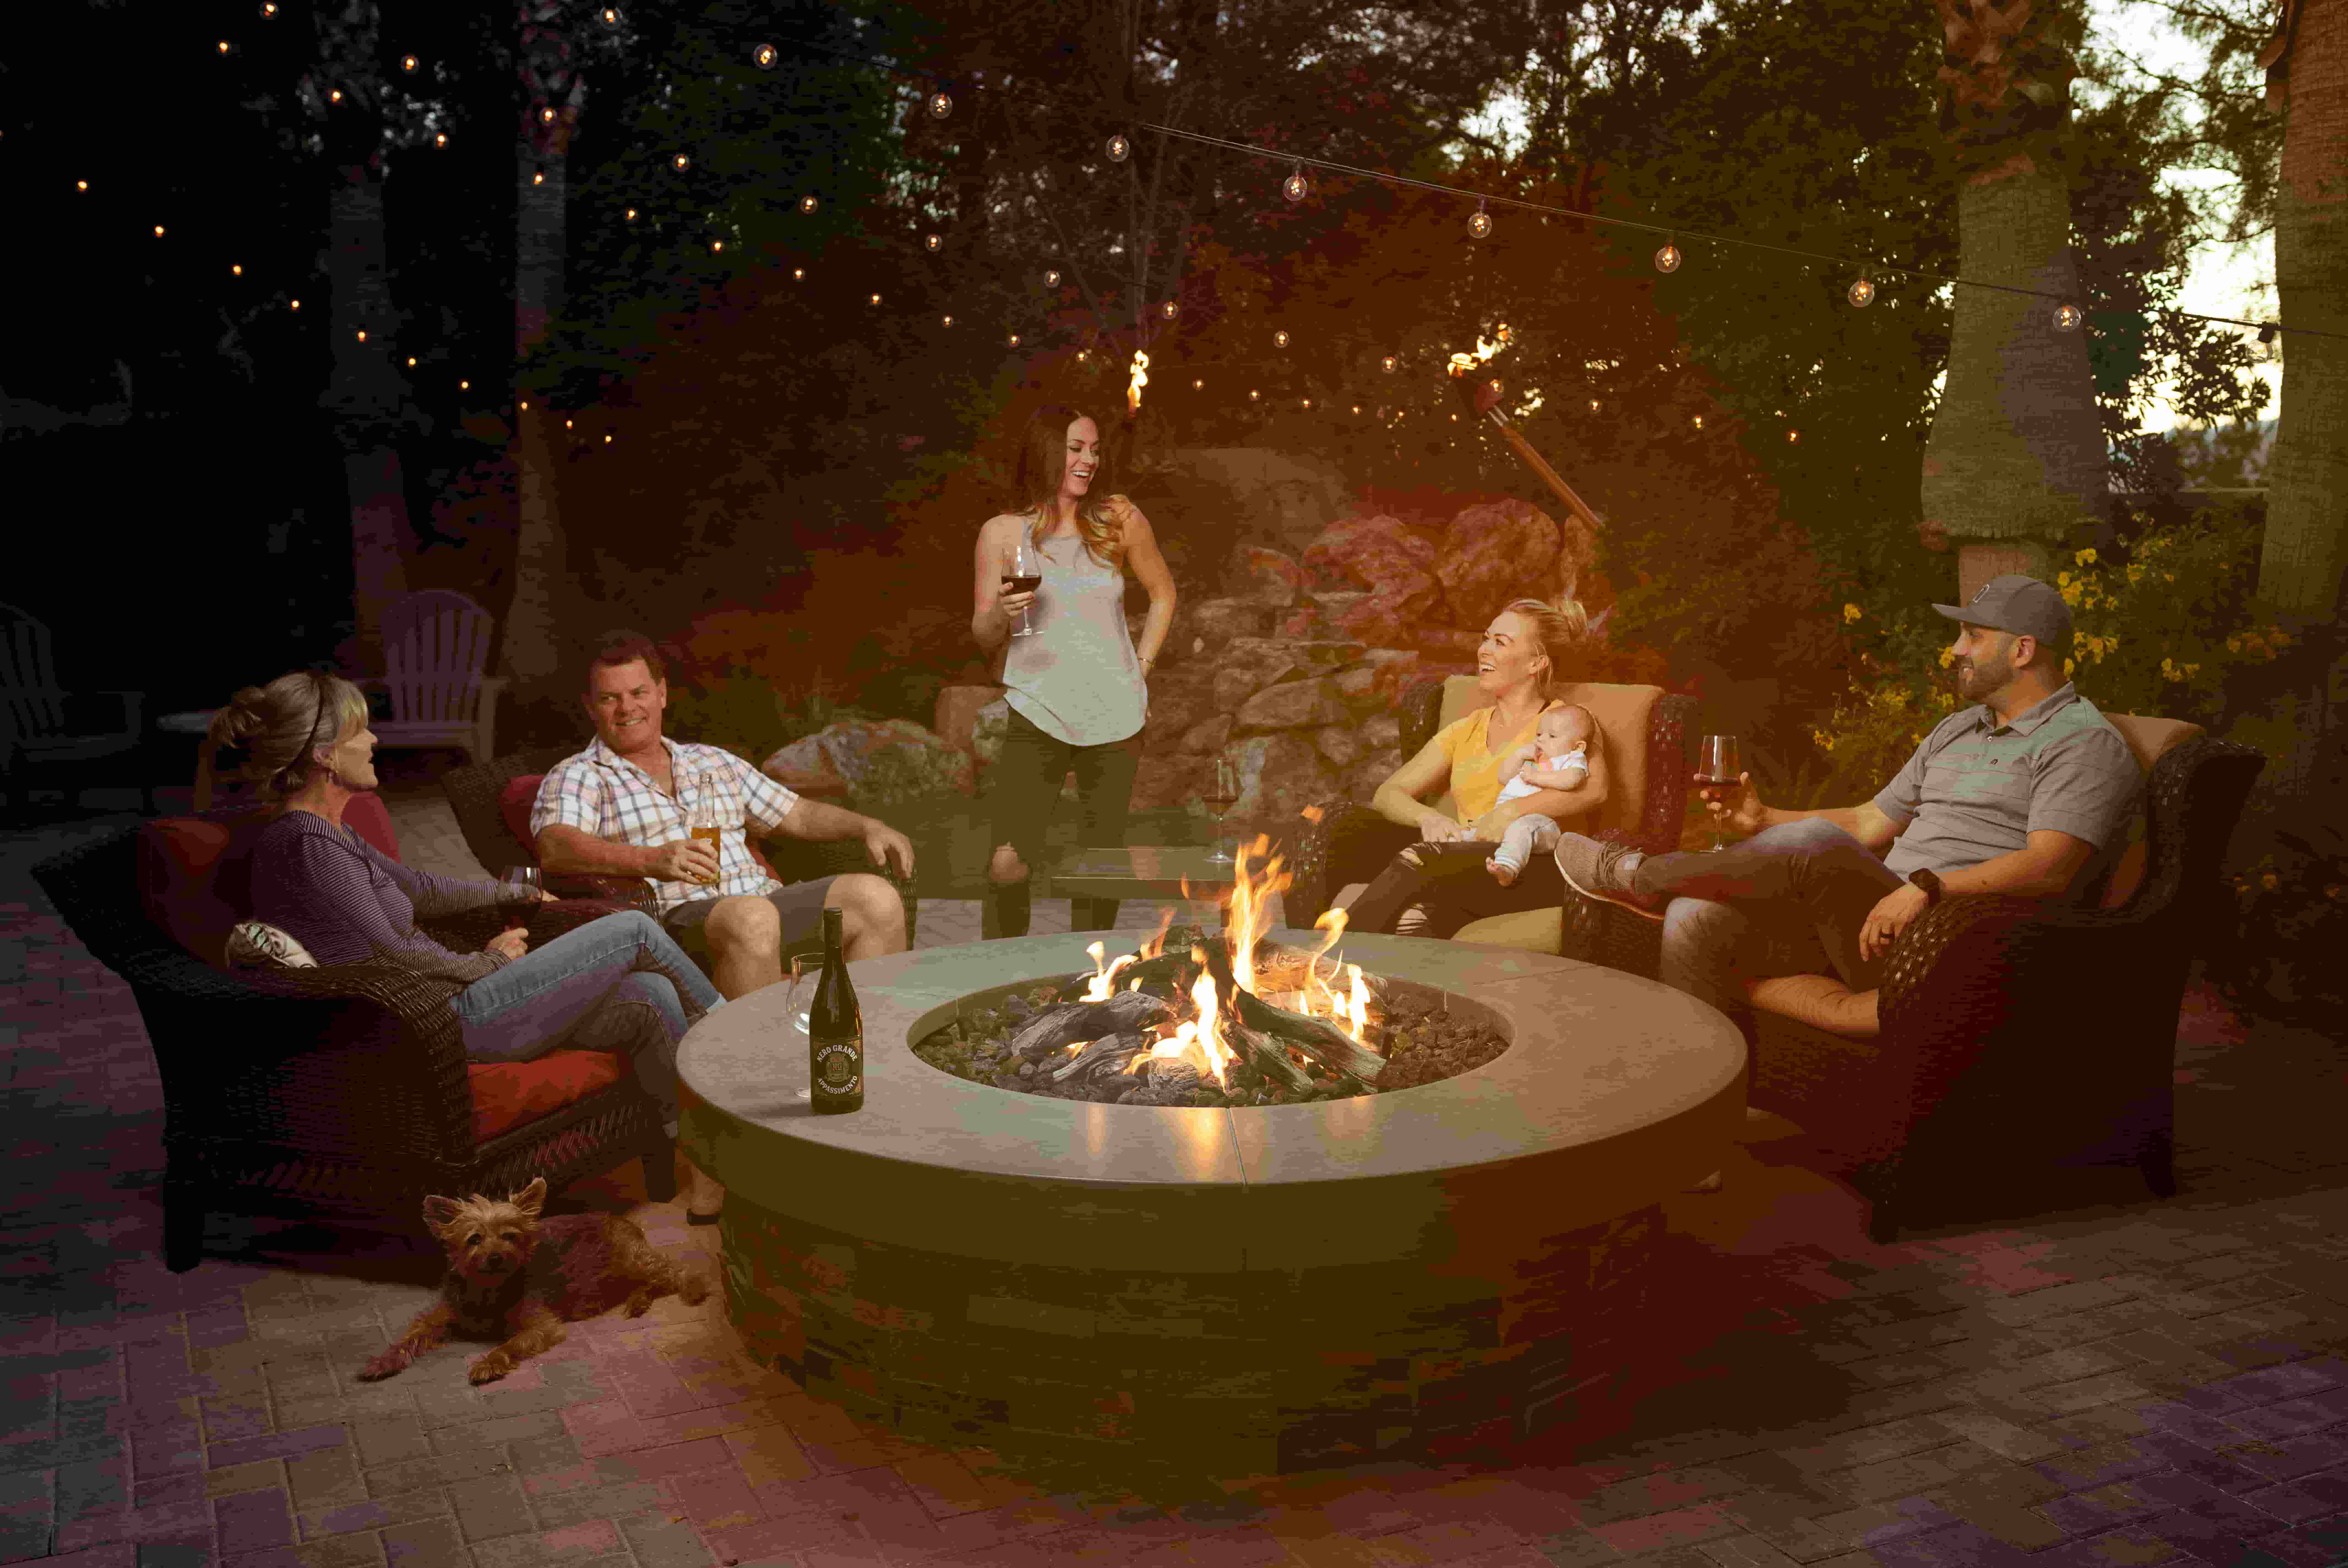 Friends around a fire pit by American Gas Lamp